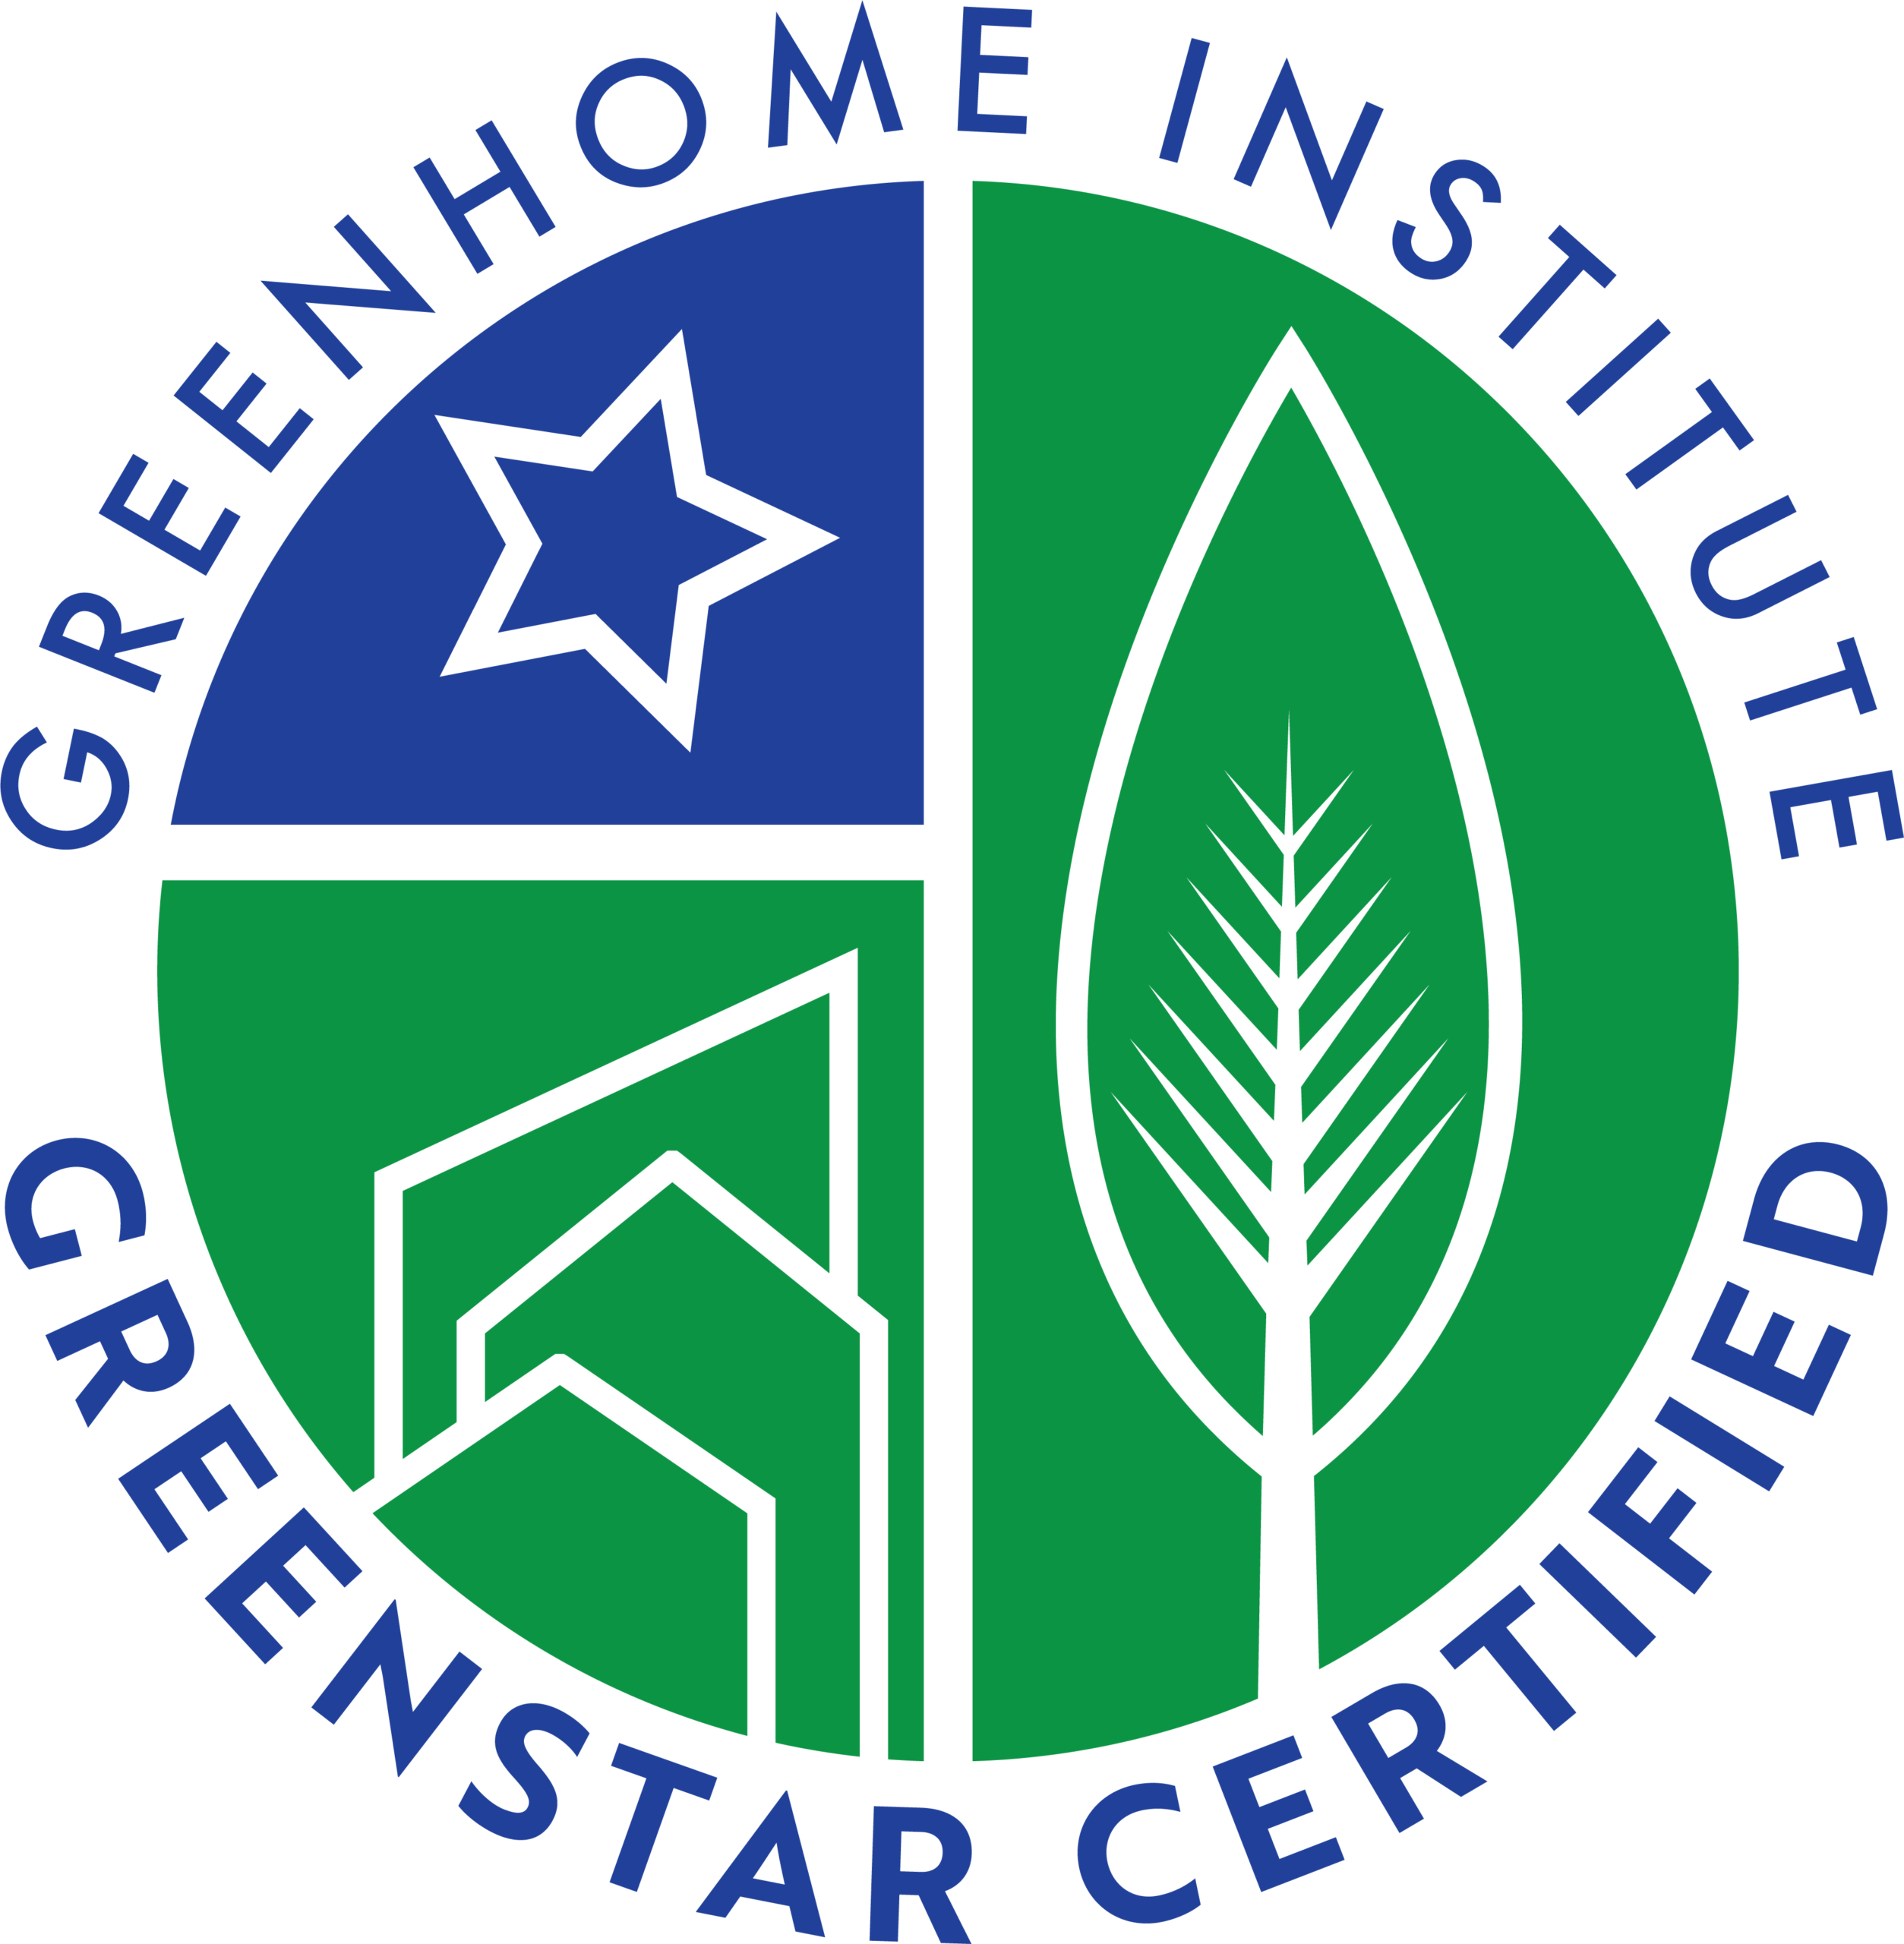 https://greenhomeinstitute.org/wp-content/uploads/2021/06/GHI_Certified-scaled.jpg